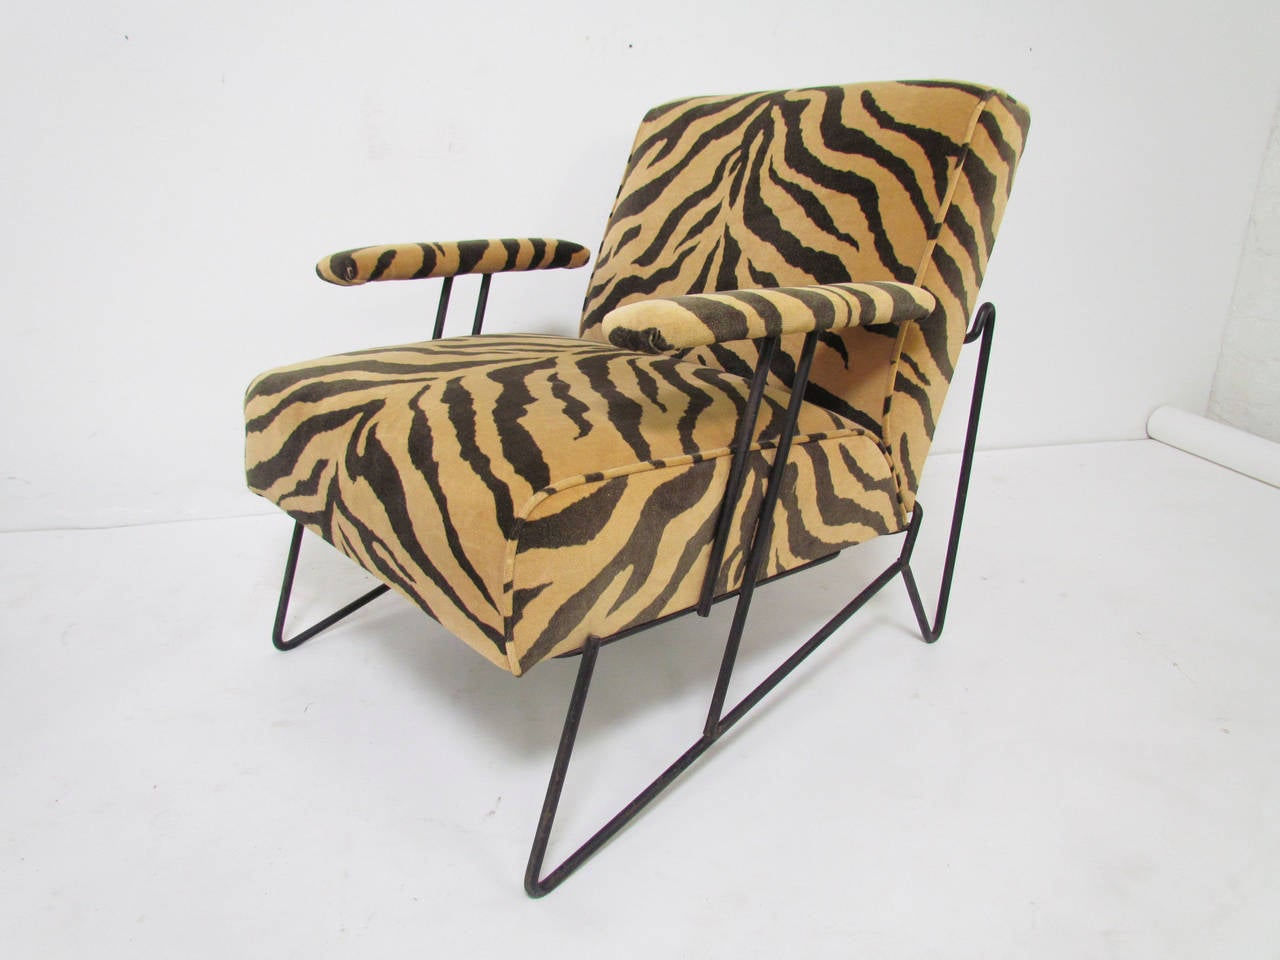 American Sculptural Wrought Iron Lounge Chair and Ottoman by Dorothy Schindele